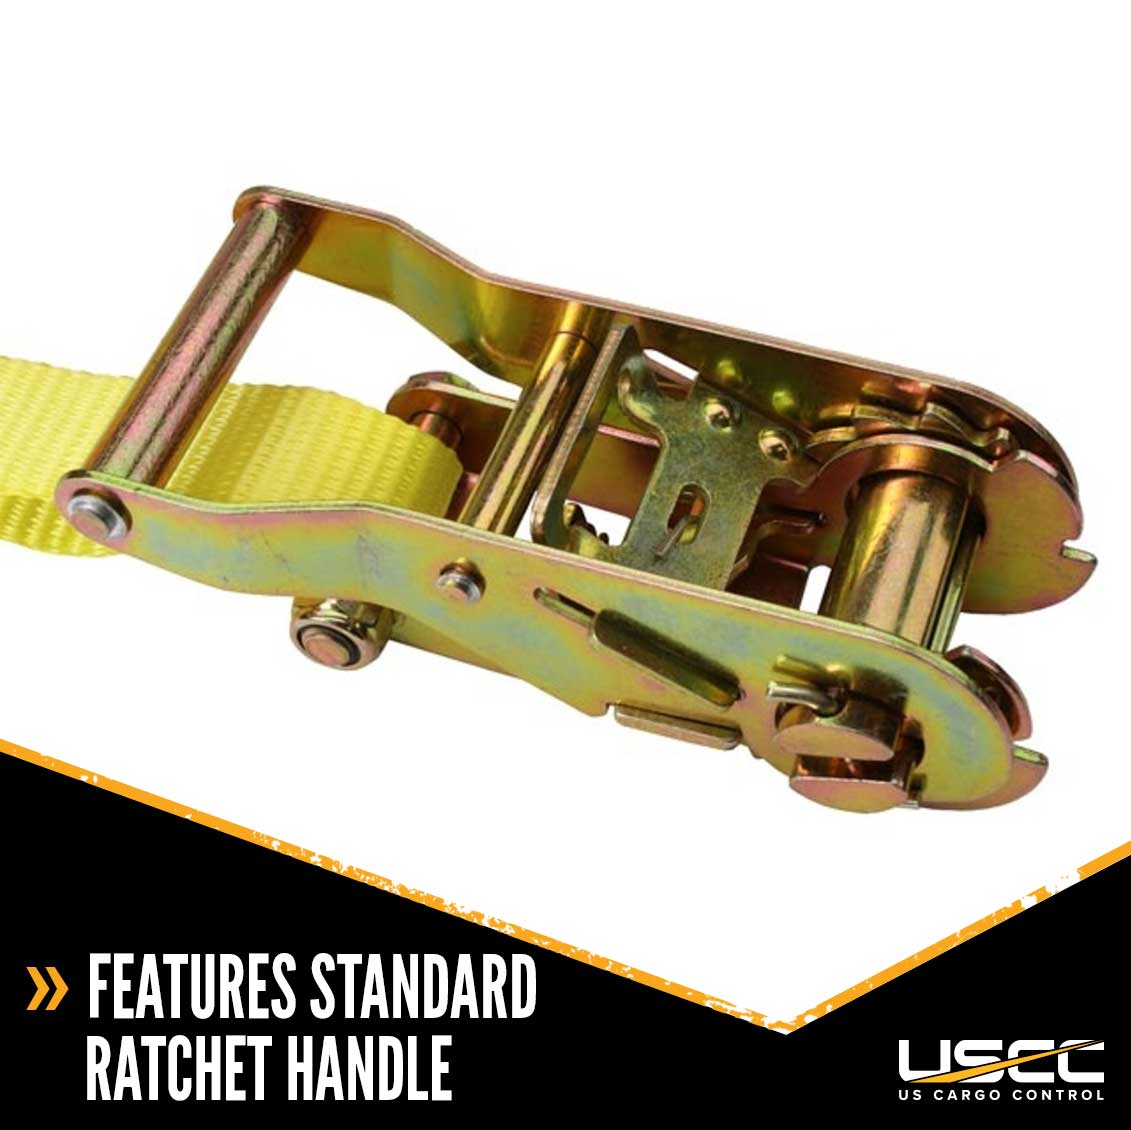 1 inch x 10 foot Ratchet Strap w SHook image 3 of 9